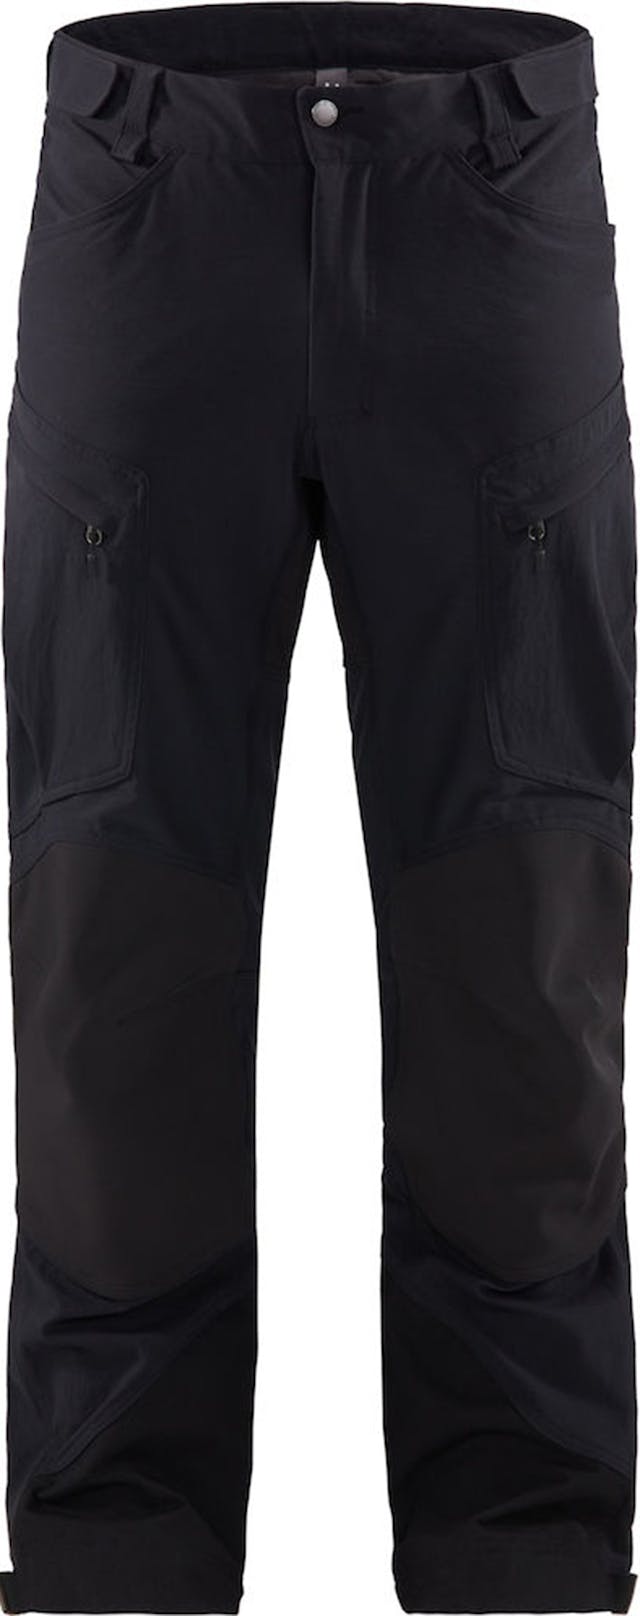 Product image for Rugged Mountain Pant - Men's